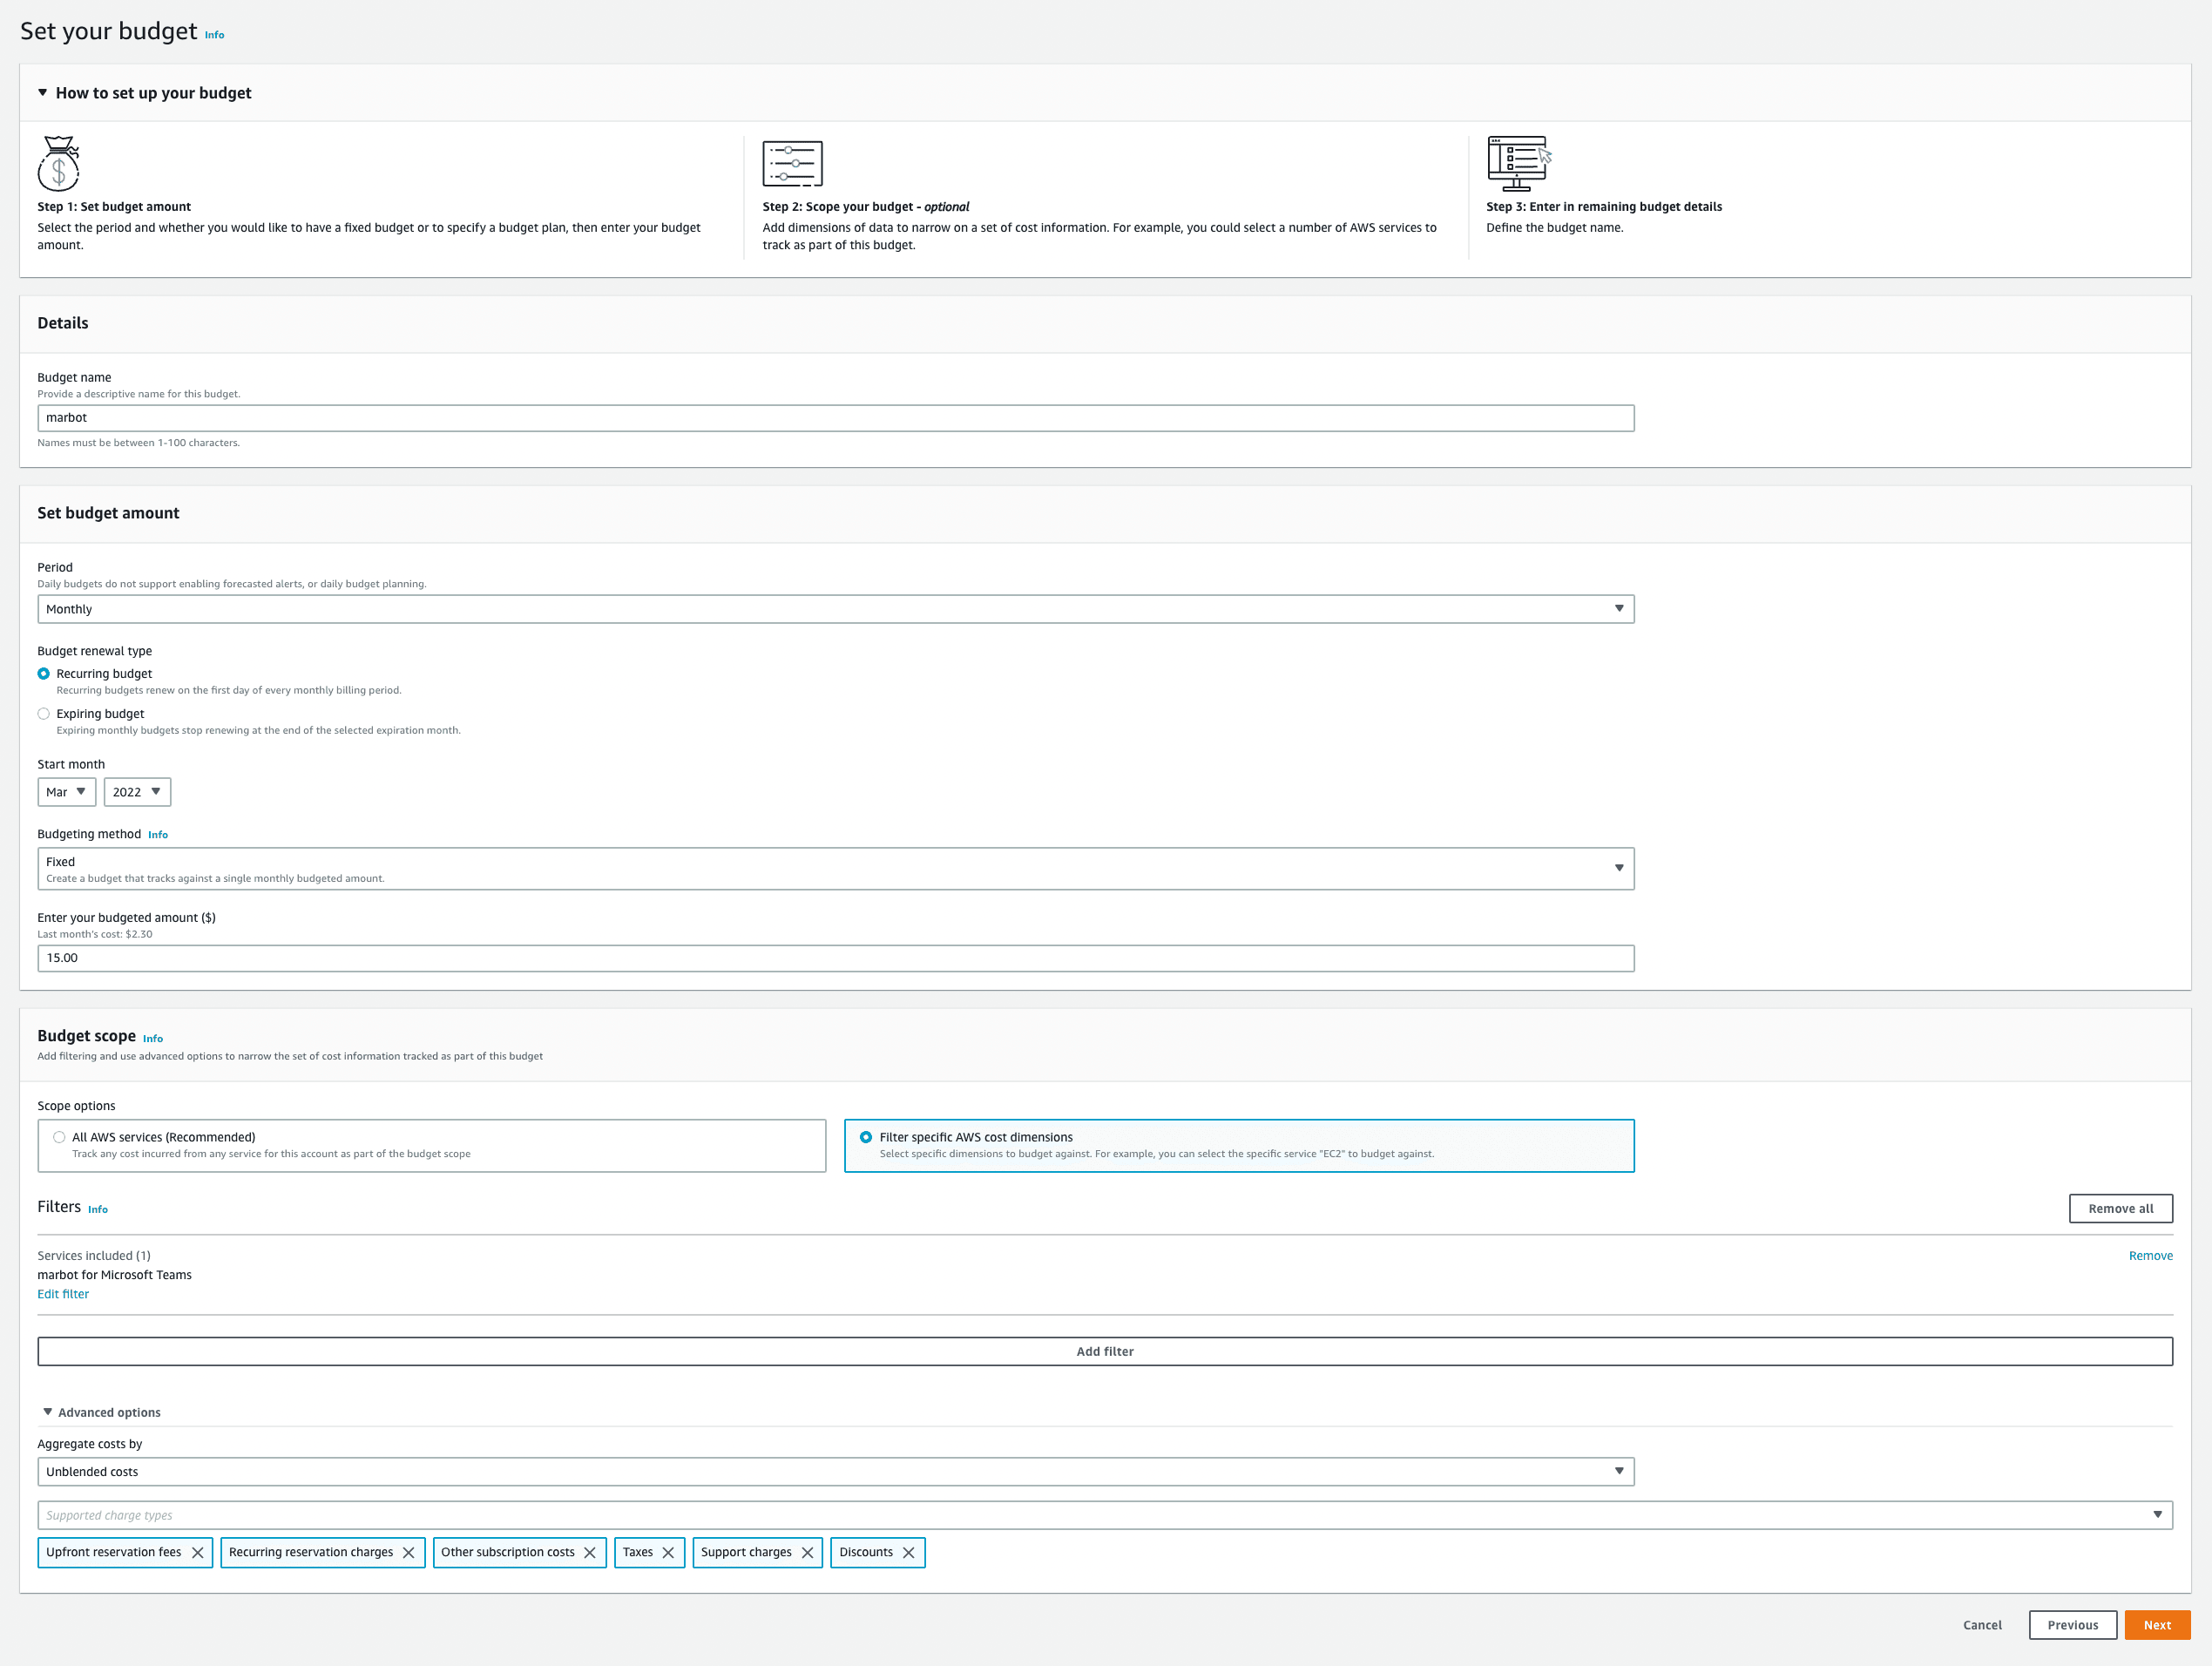 Creating an AWS Budget to monitor costs for marbot: Step 2